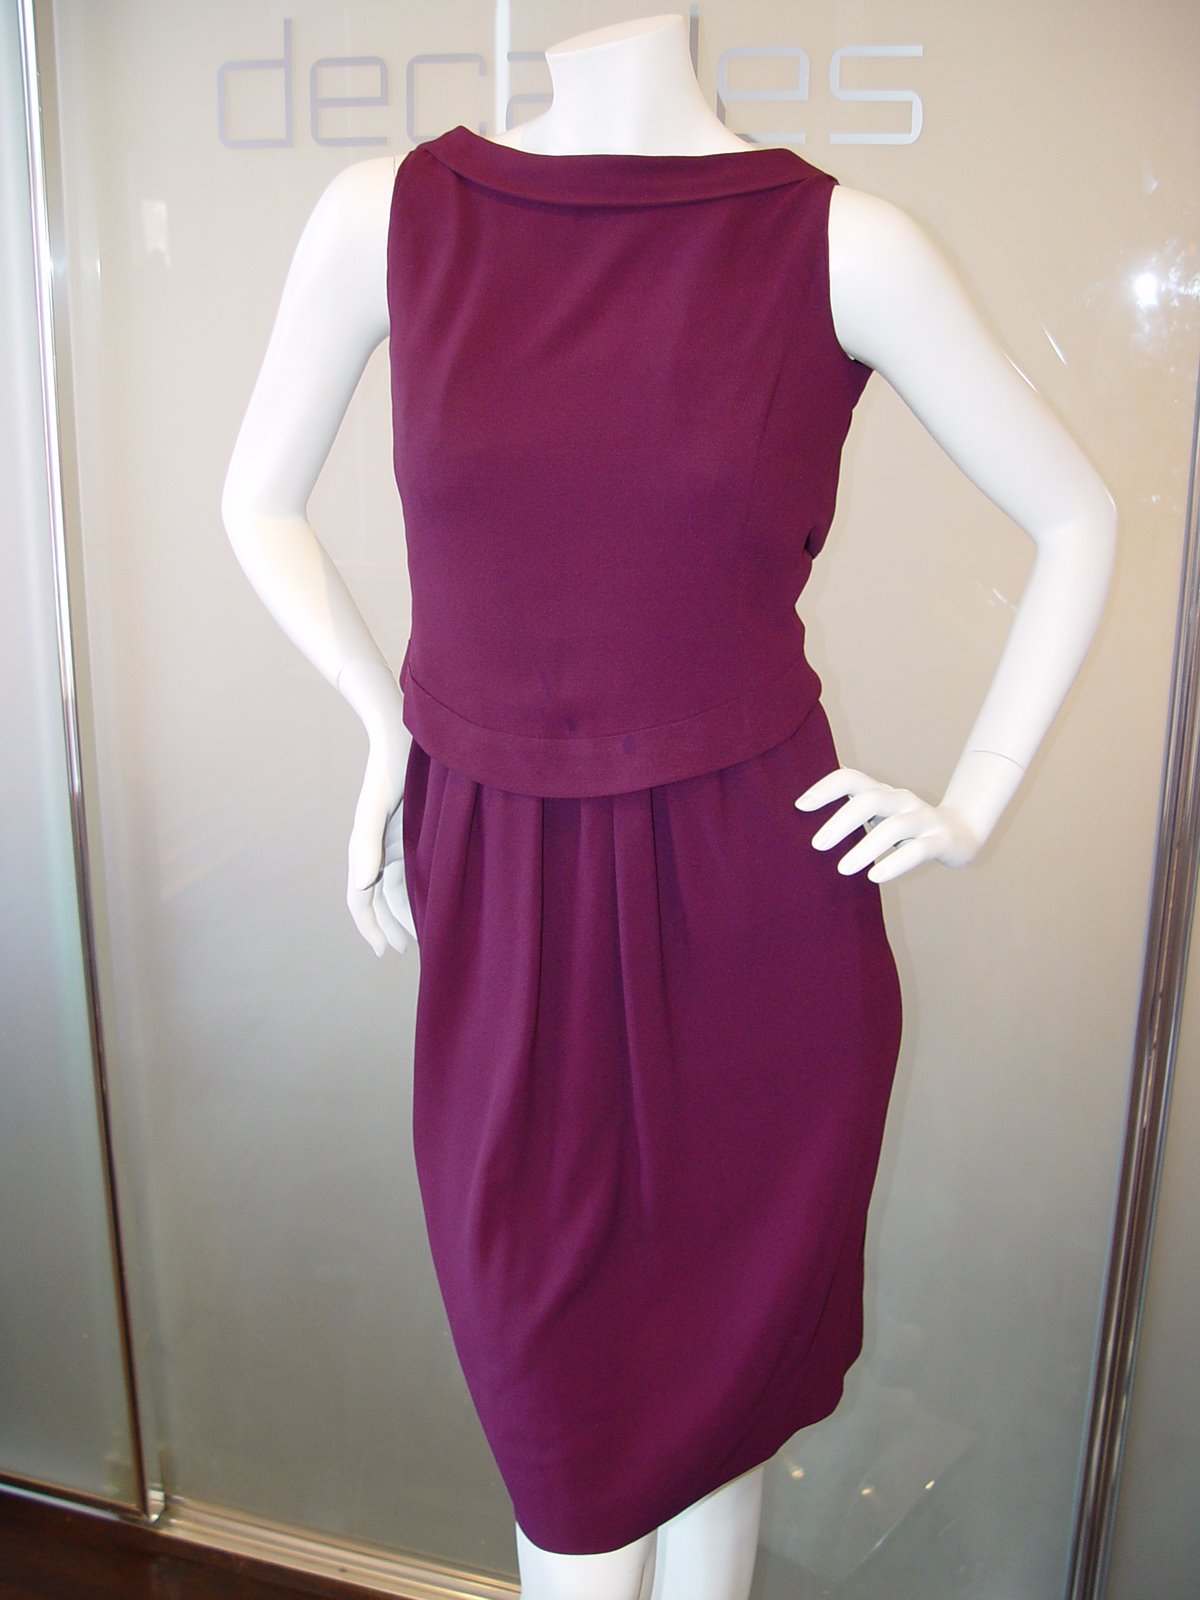 [PIERRE+CARDIN+COUTURE+AUBERGINE+TWO+PIECE+EFFECT+WITH+BACKLESS+DESIGN+C+60S.JPG.JPG]